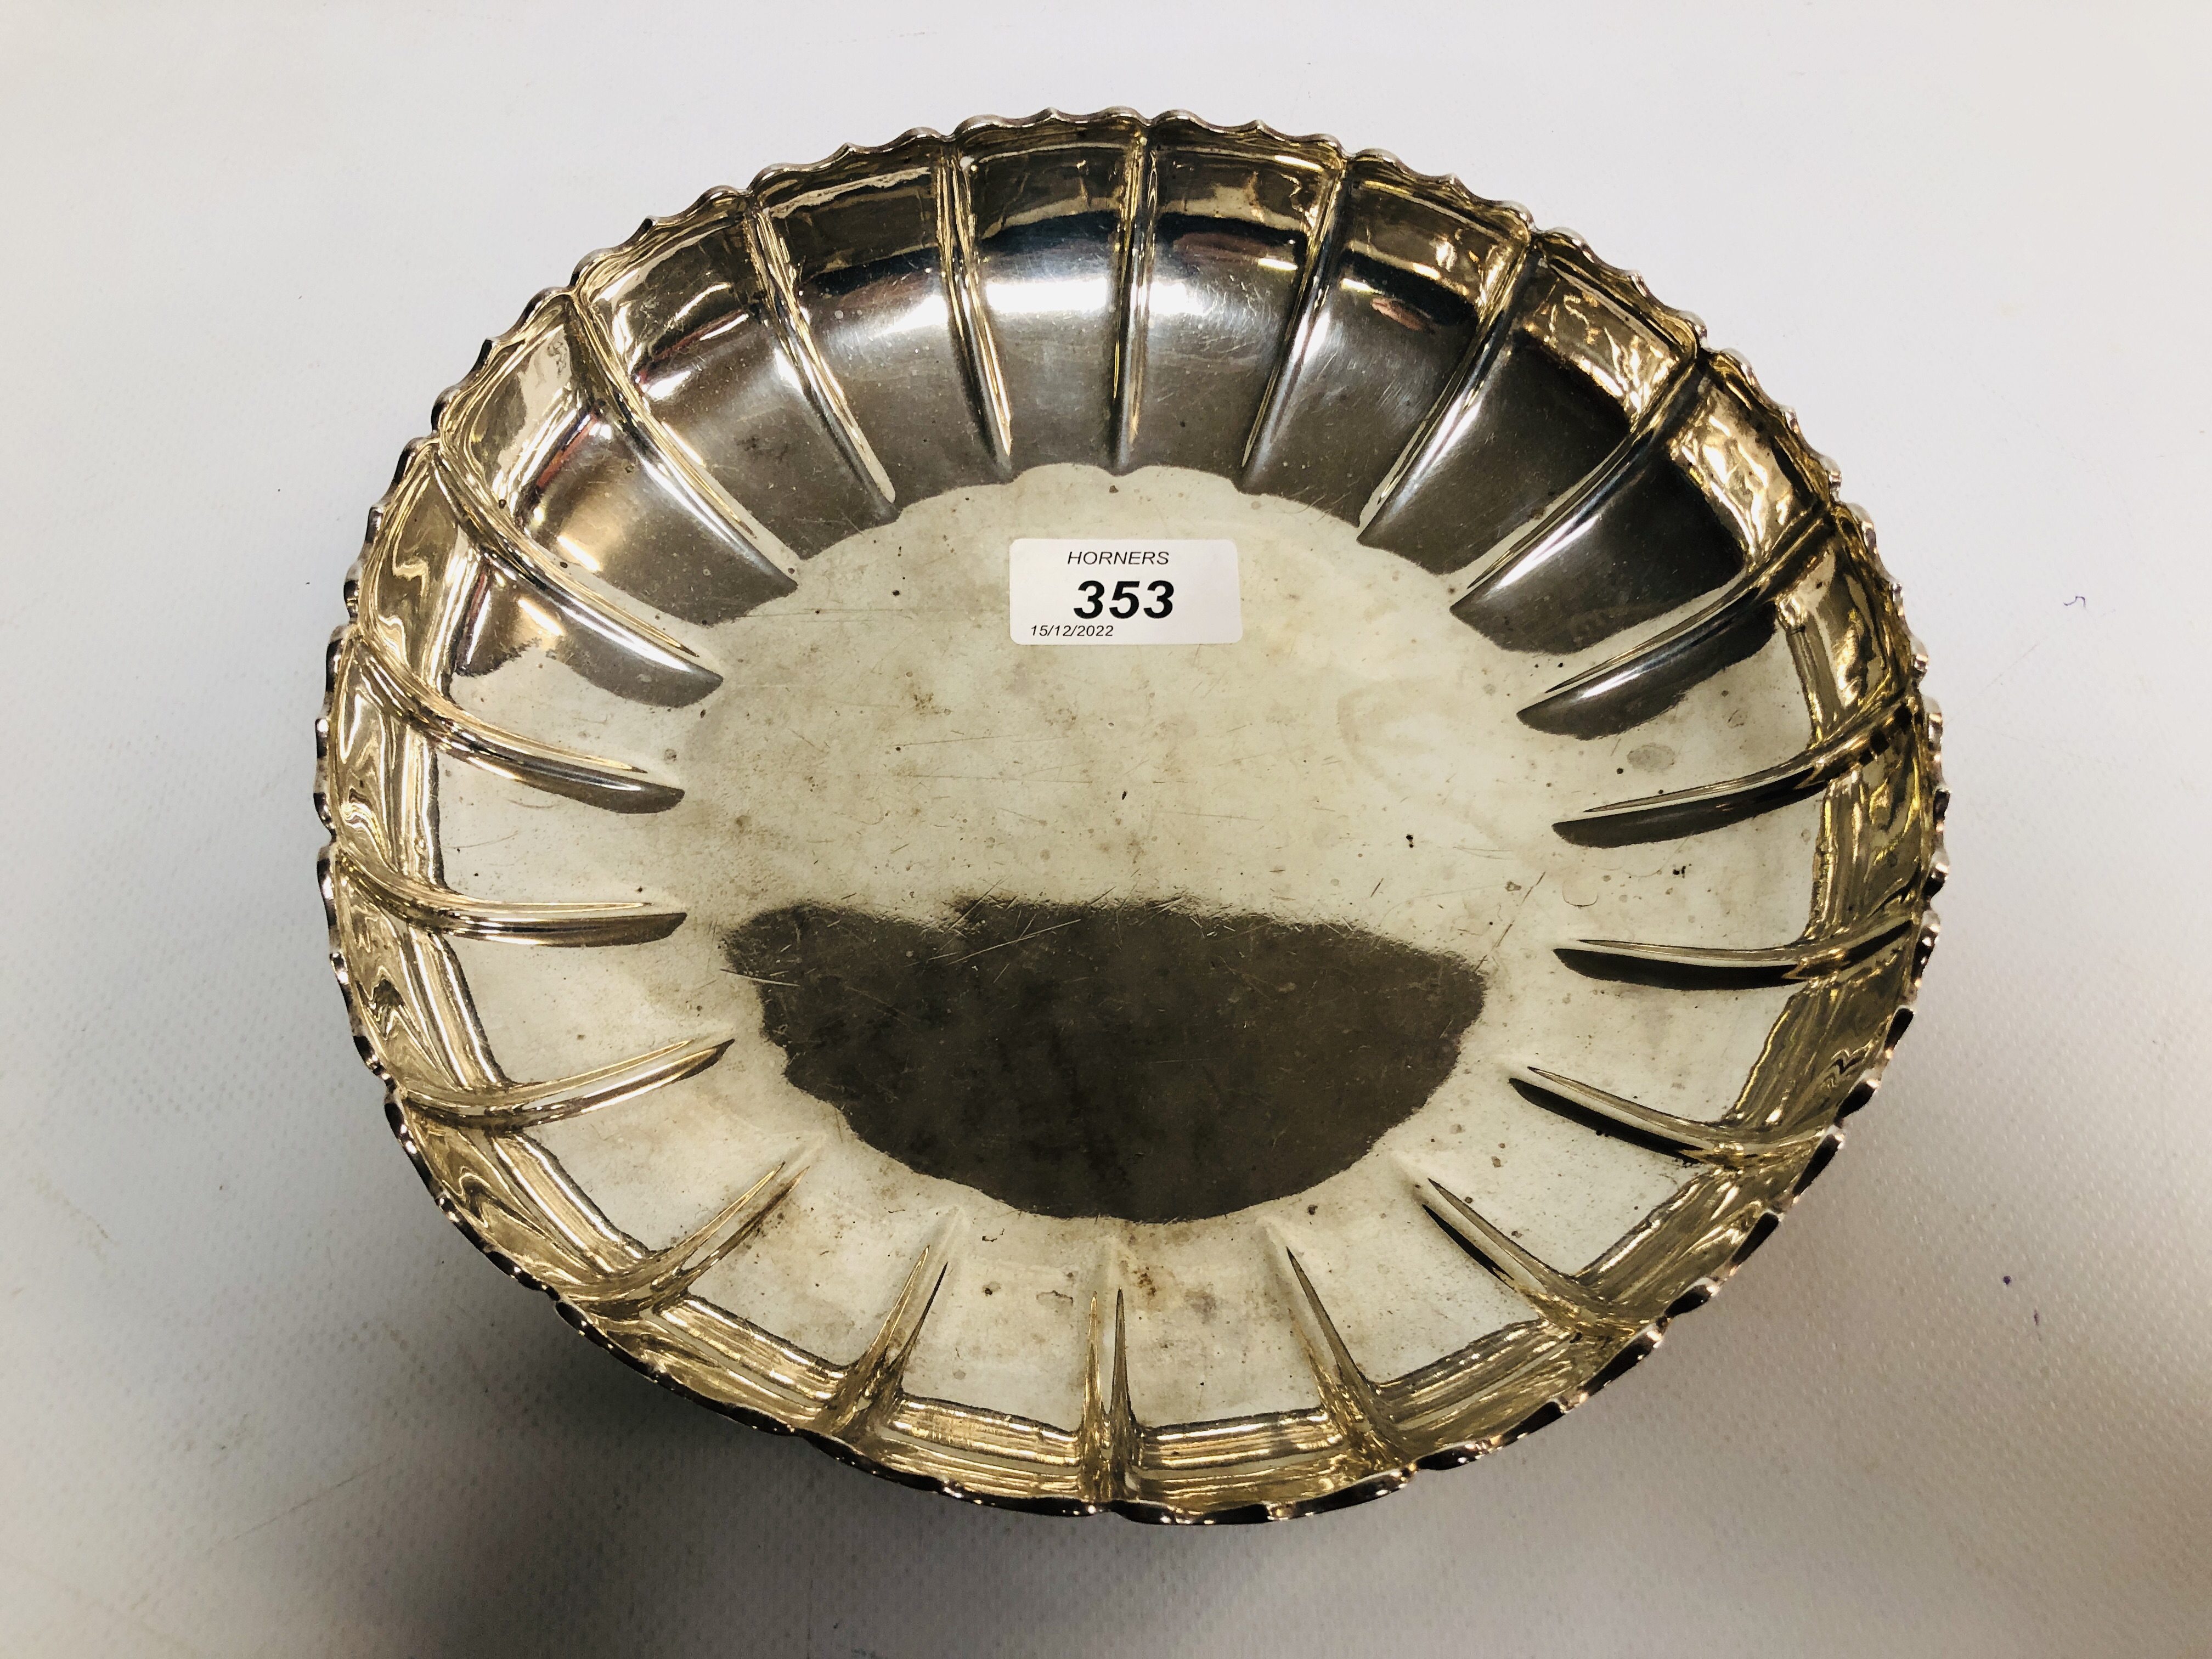 SILVER CIRCULAR DISH WITH FRILLED EDGE THE INTERIOR REEDED, LONDON 1900, D 21.5CM. - Image 3 of 8